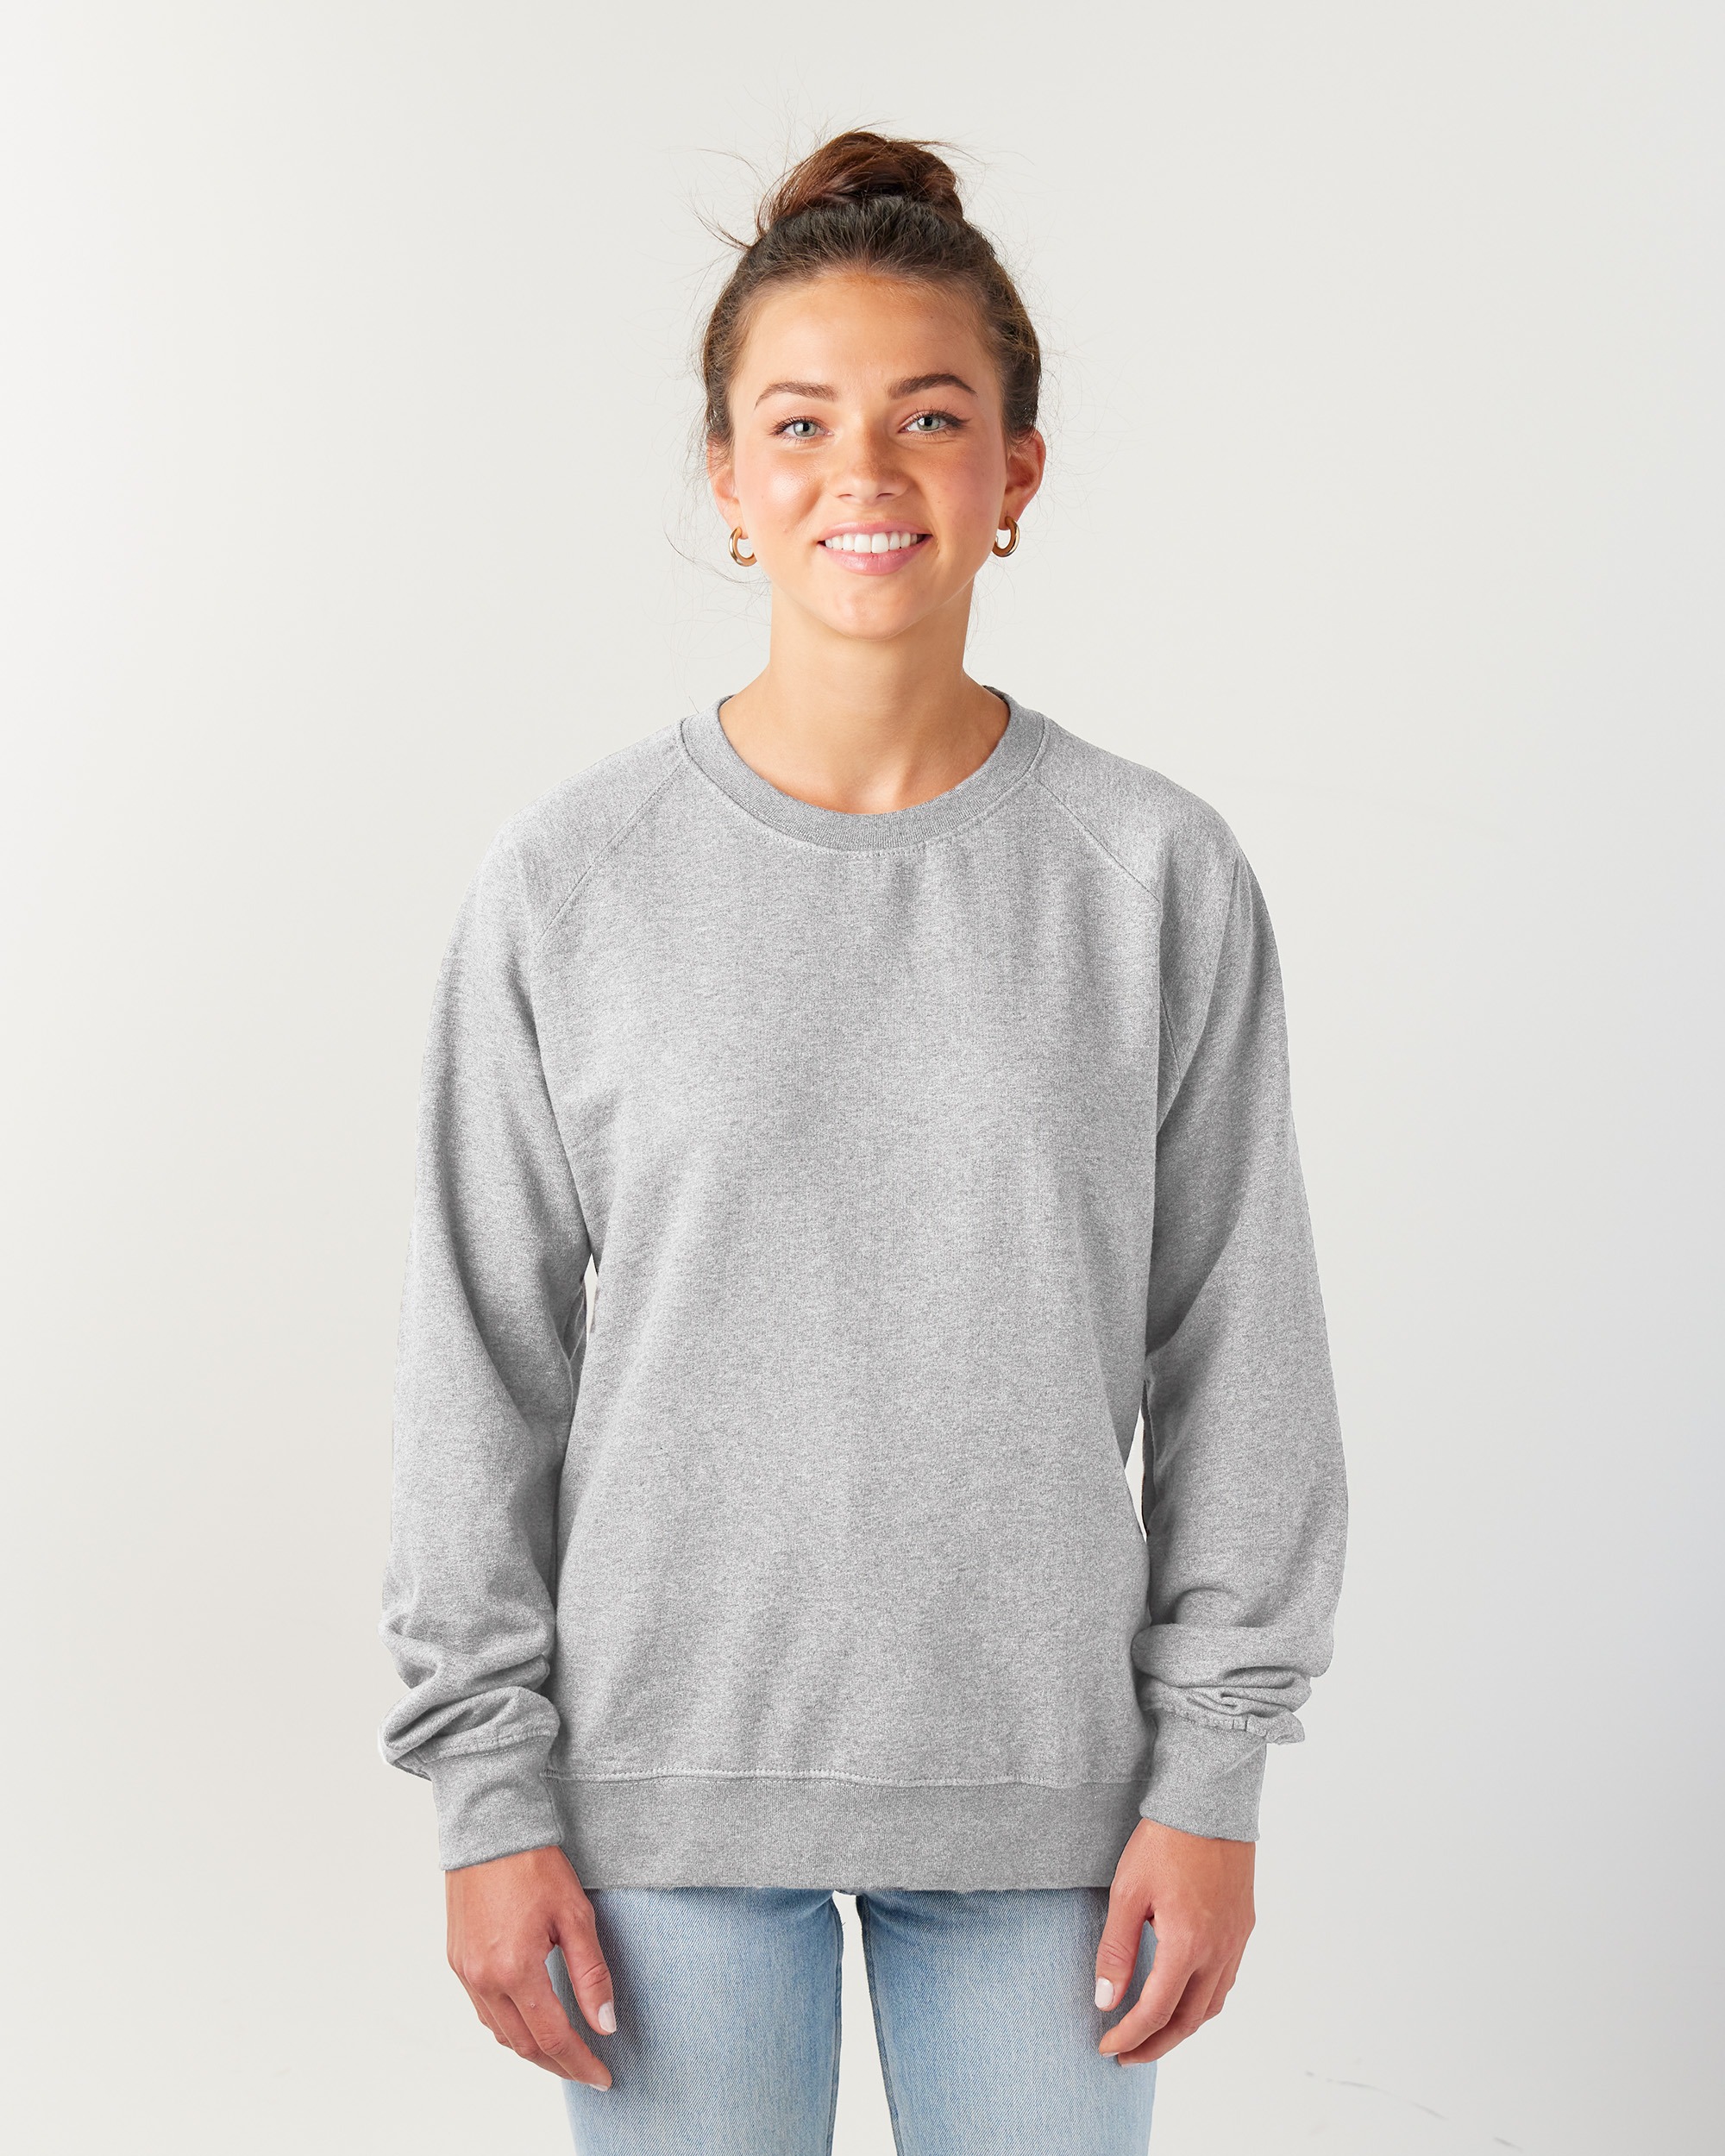 Enza® 32579 Ladies PFC Pullover Crew, shown in Athletic Heather